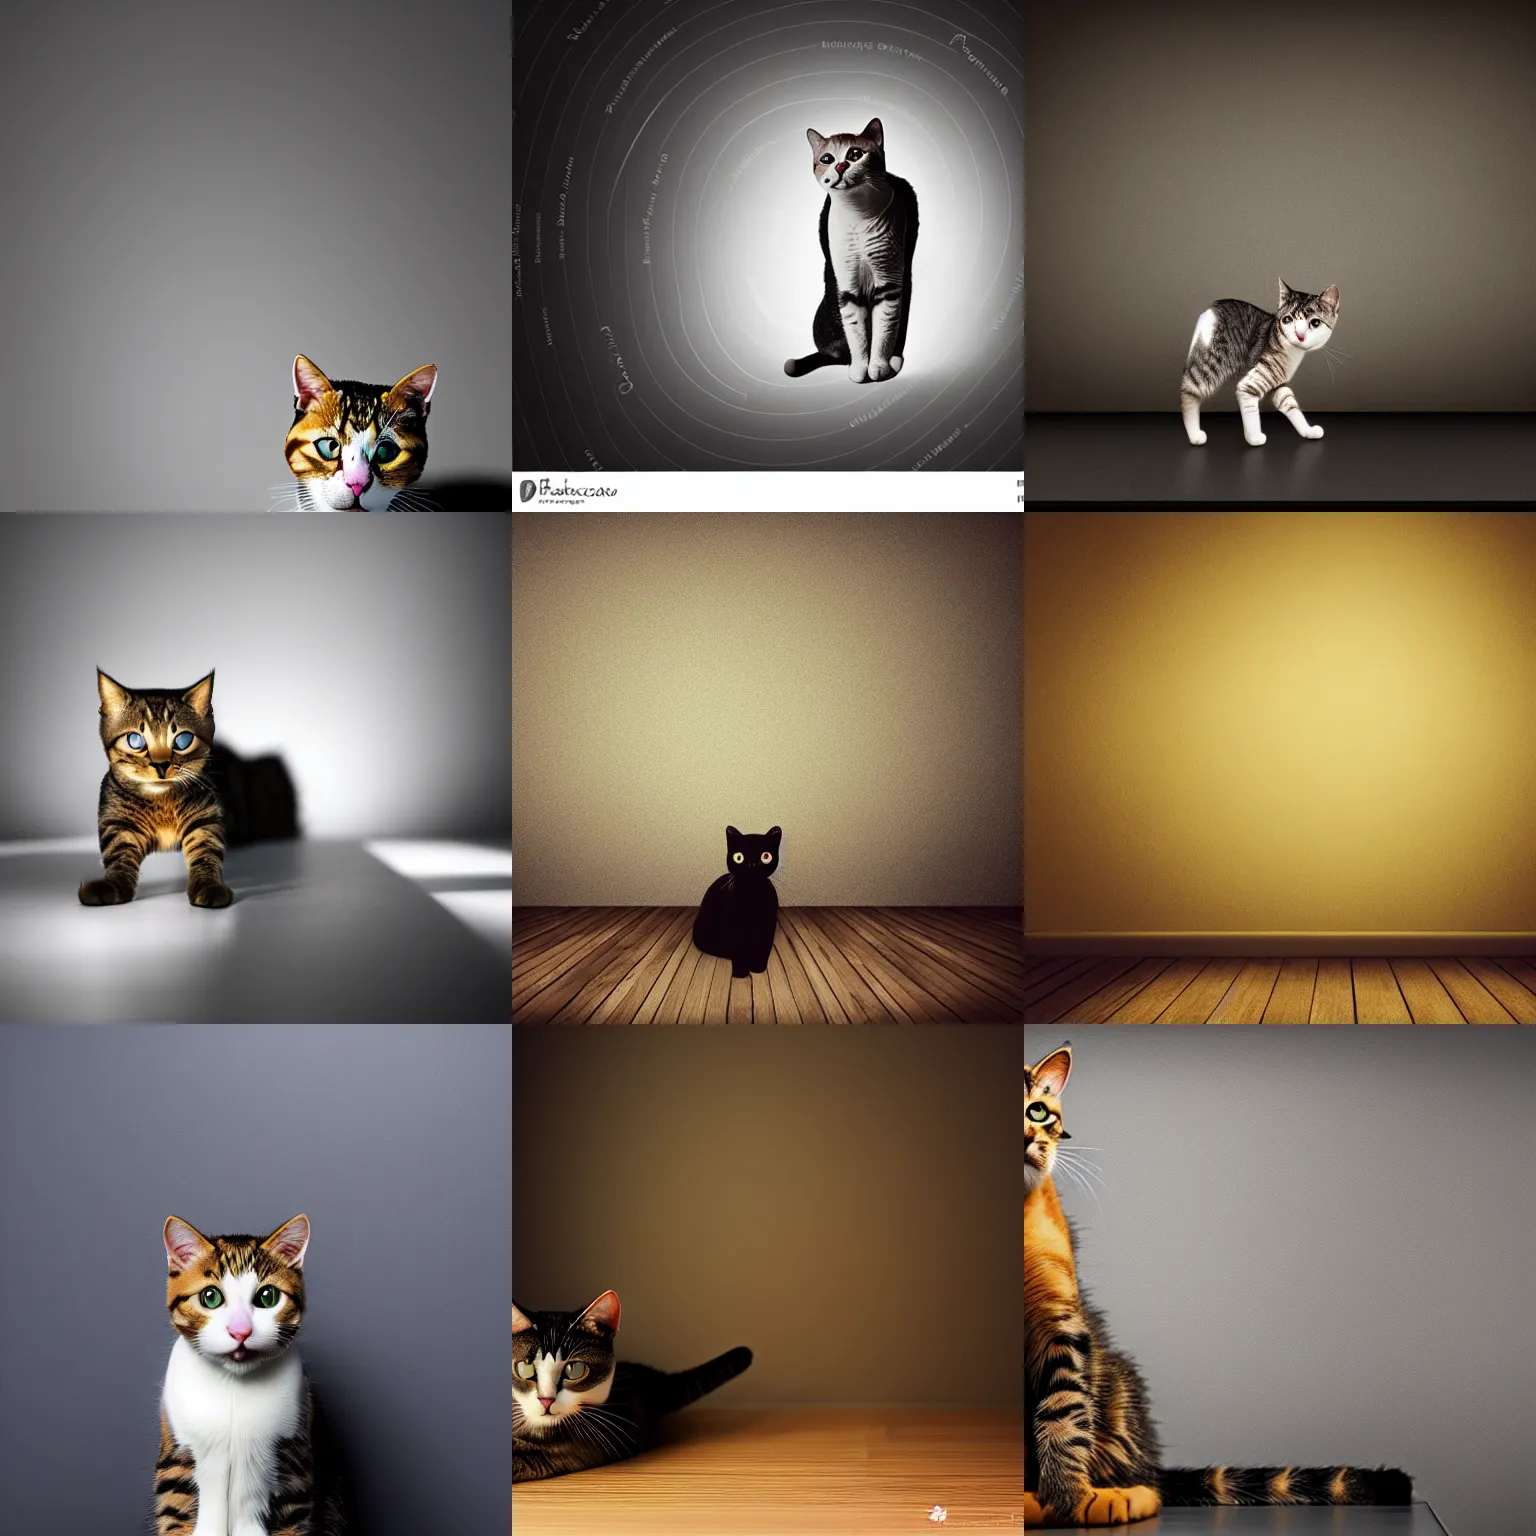 Prompt: cats, rule of thirds, dynamic composition, studio lighting, random wall or scenery background